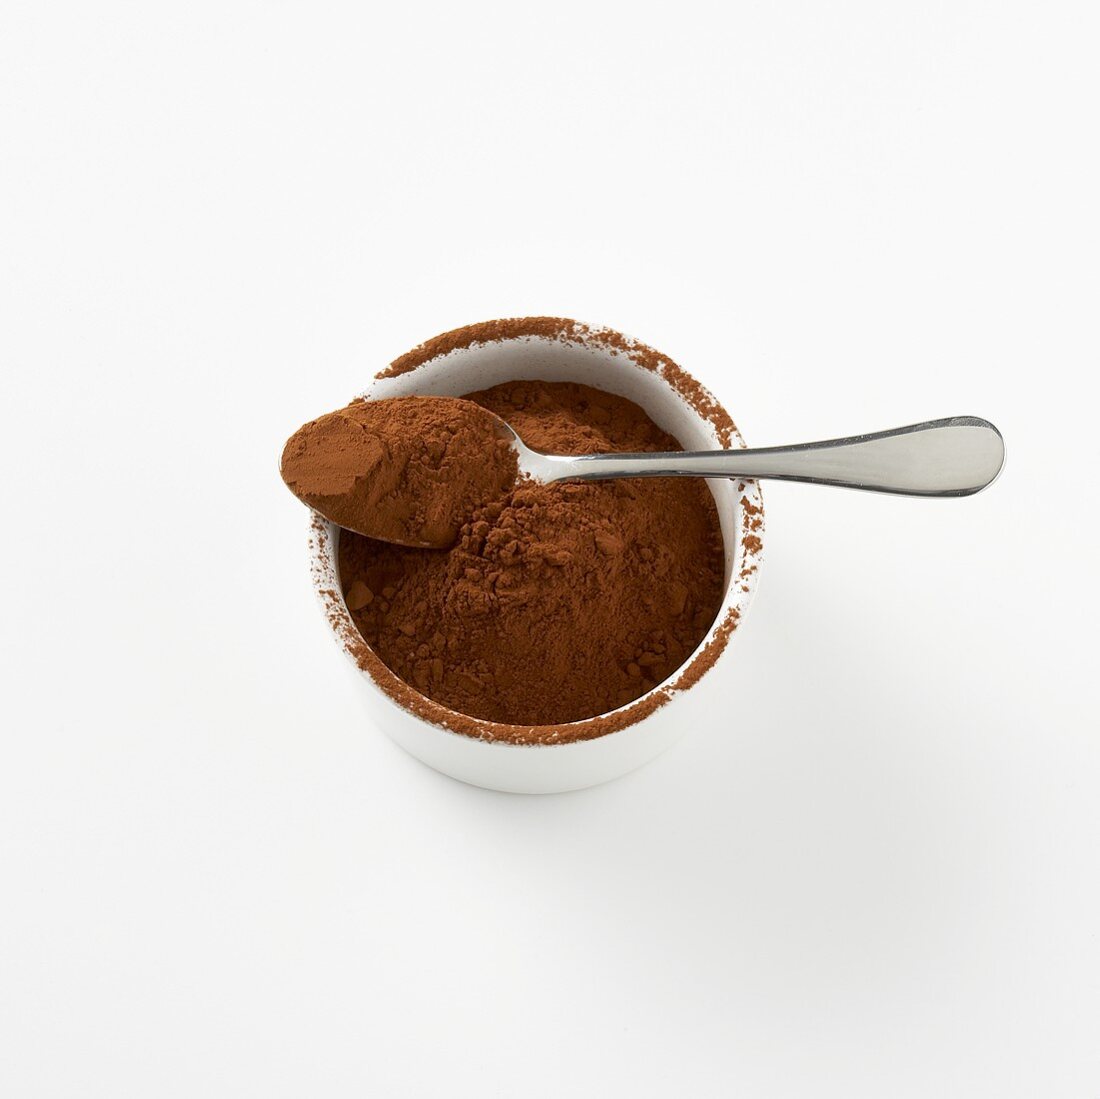 Cocoa powder in small dish with spoon